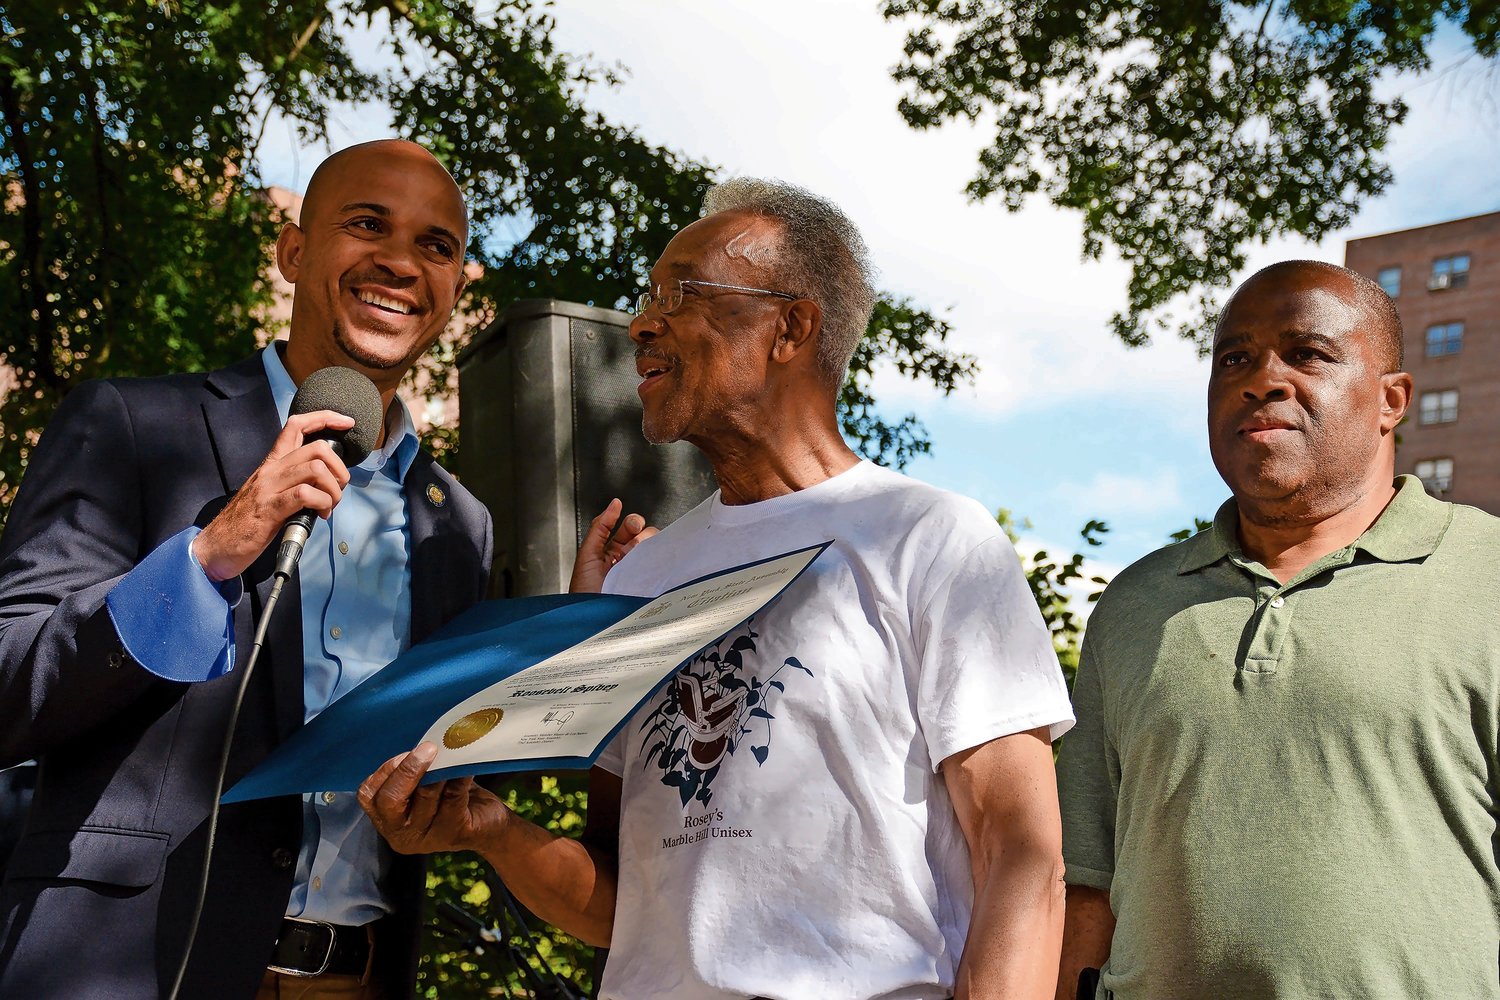 Assemblyman Manny de los Santos, at left, presents a citation to Rosey Spivey, center, on Saturday for exemplary service on behalf of his community as Marble Hill tenants association president Tony Edwards, right, looks on.